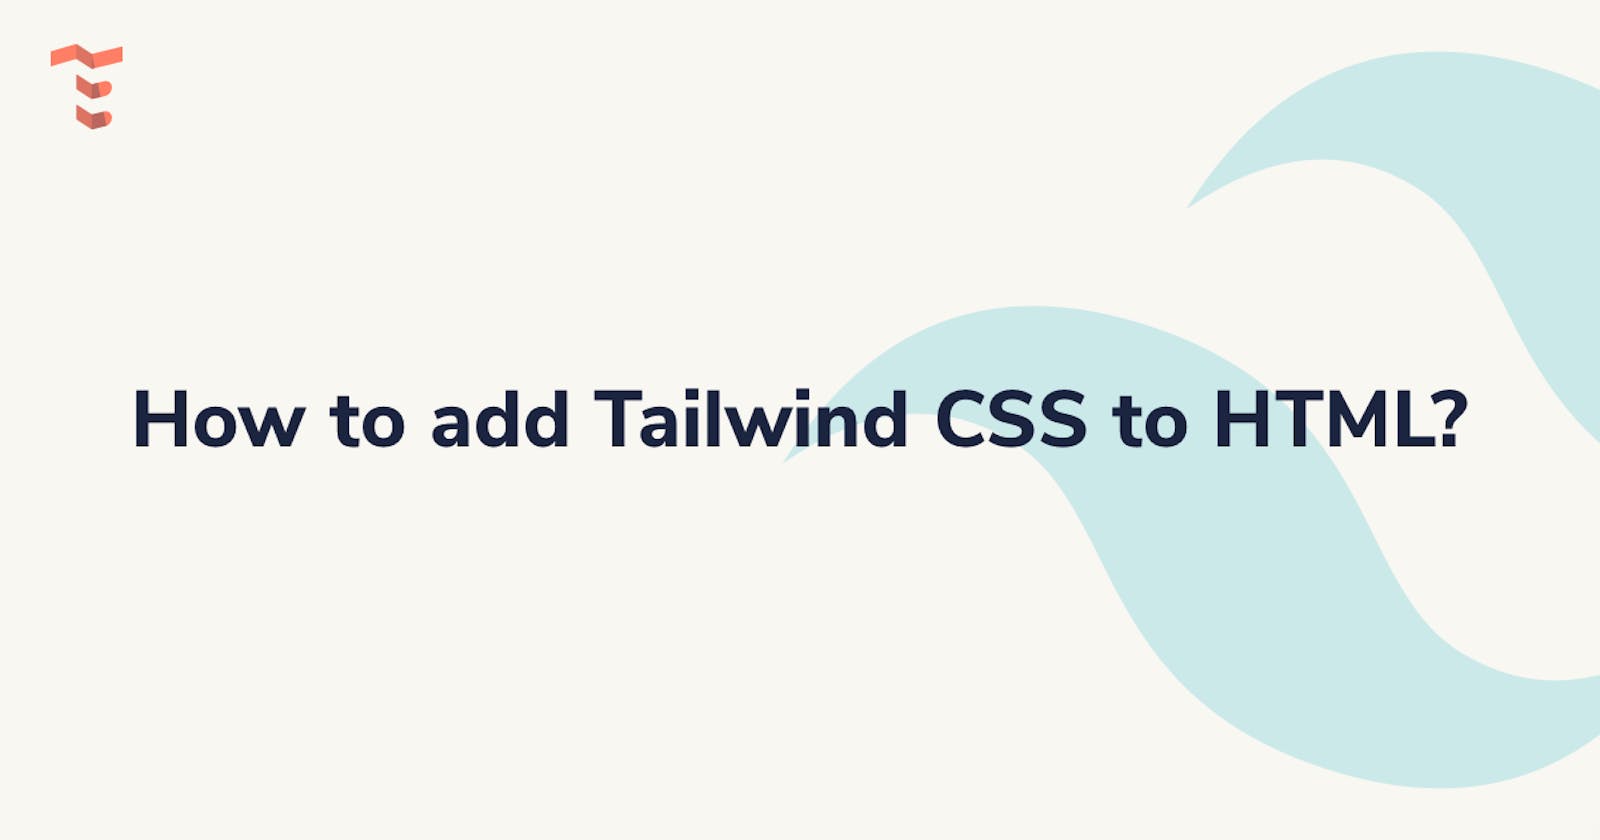 How to add Tailwind CSS to HTML?